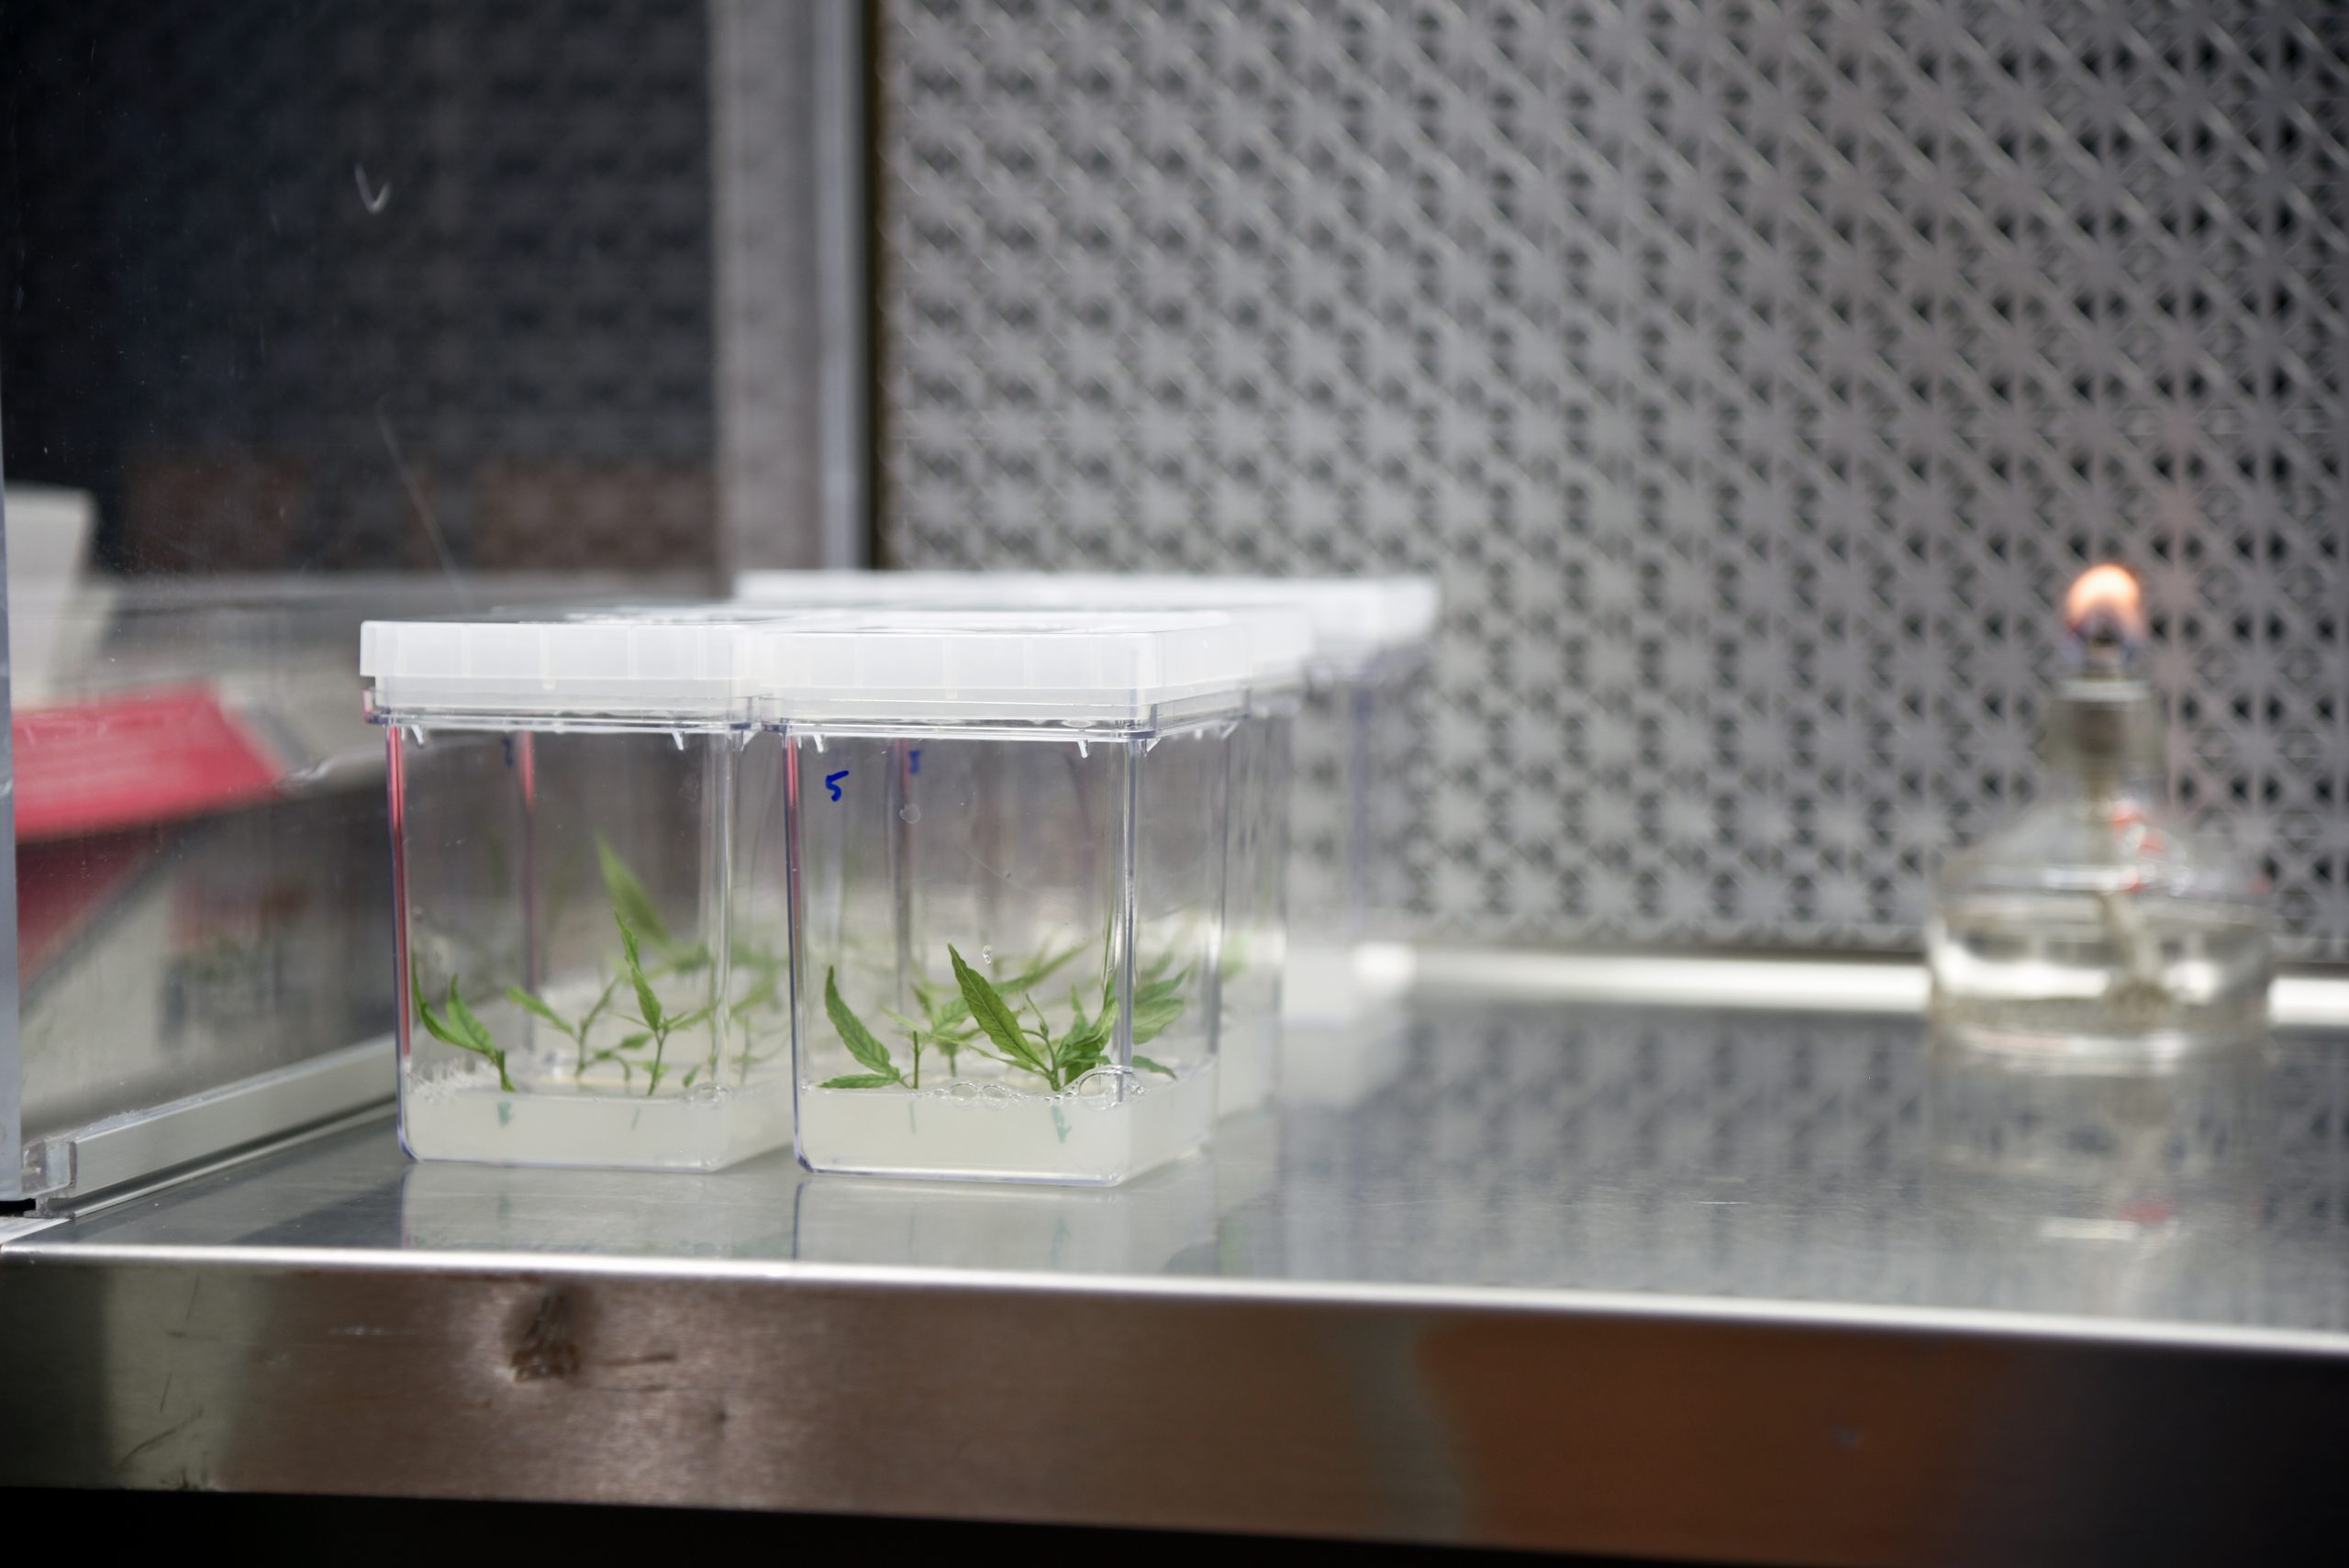 Tissue cultures from the Lubell-Brand lab